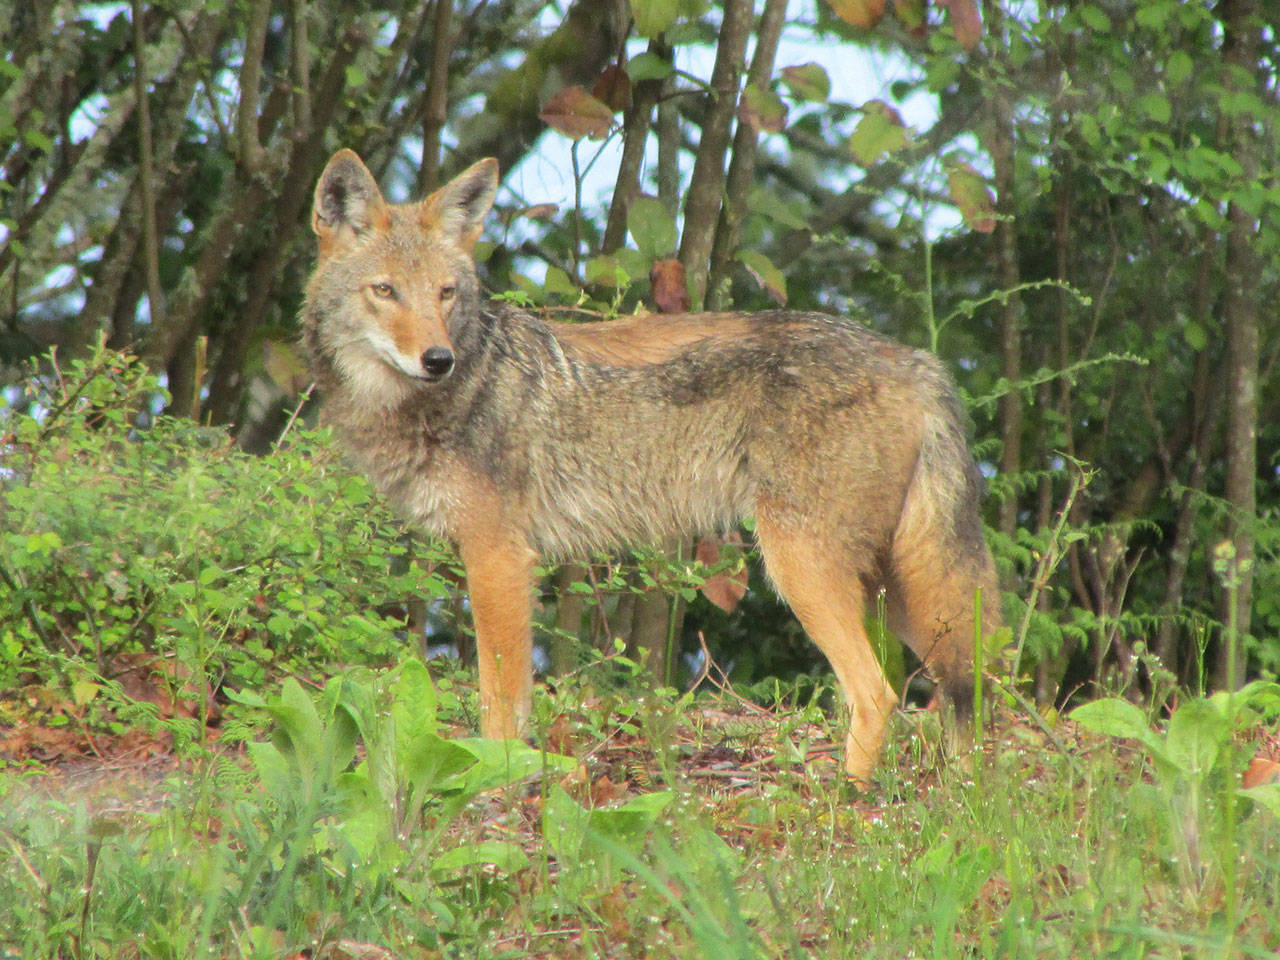 The Vashon Nature Center has been working with the Prugh Lab at the University of Washington to isolate DNA samples from coyotes’ scat, which is the first research of its kind west of the Cascades (Rich Siegrist Photo).